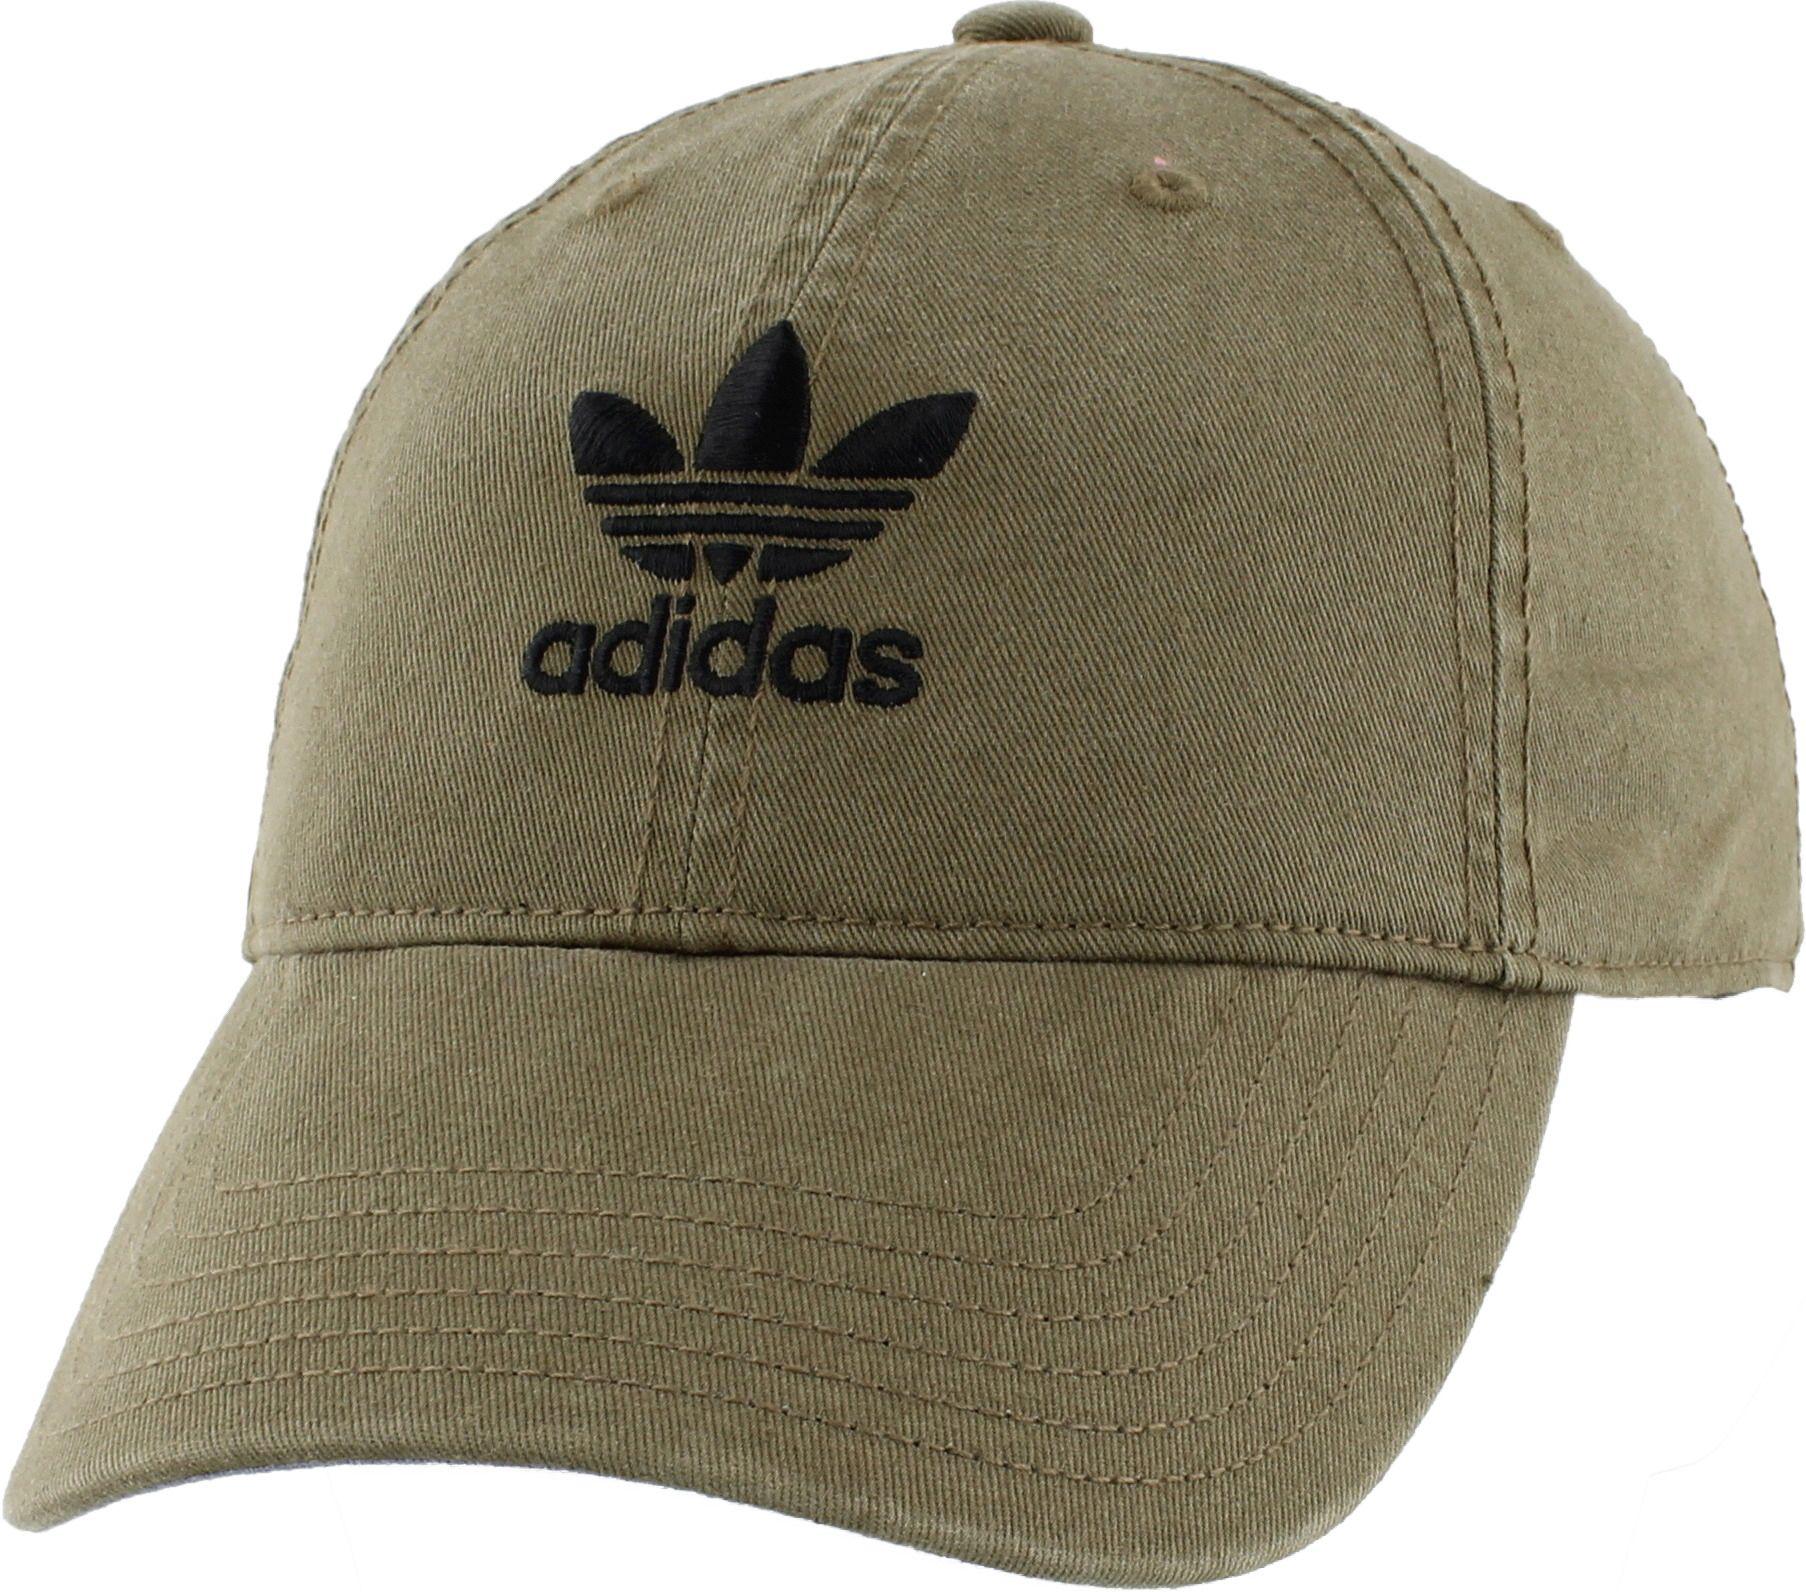 adidas relaxed strap back hat